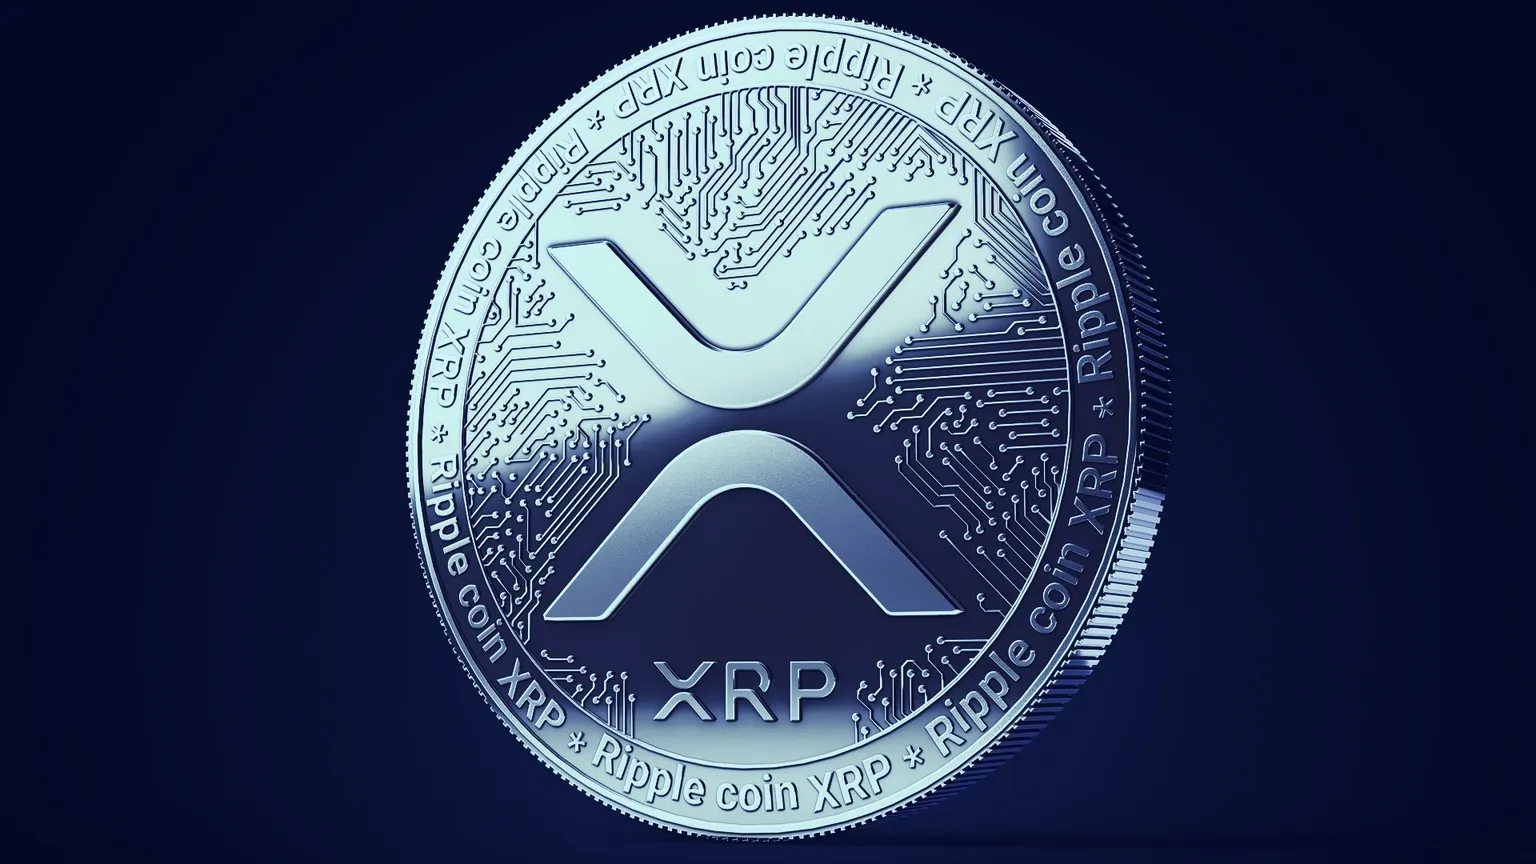 XRP is the fourth largest cryptocurrency by market cap. Image: Shutterstock